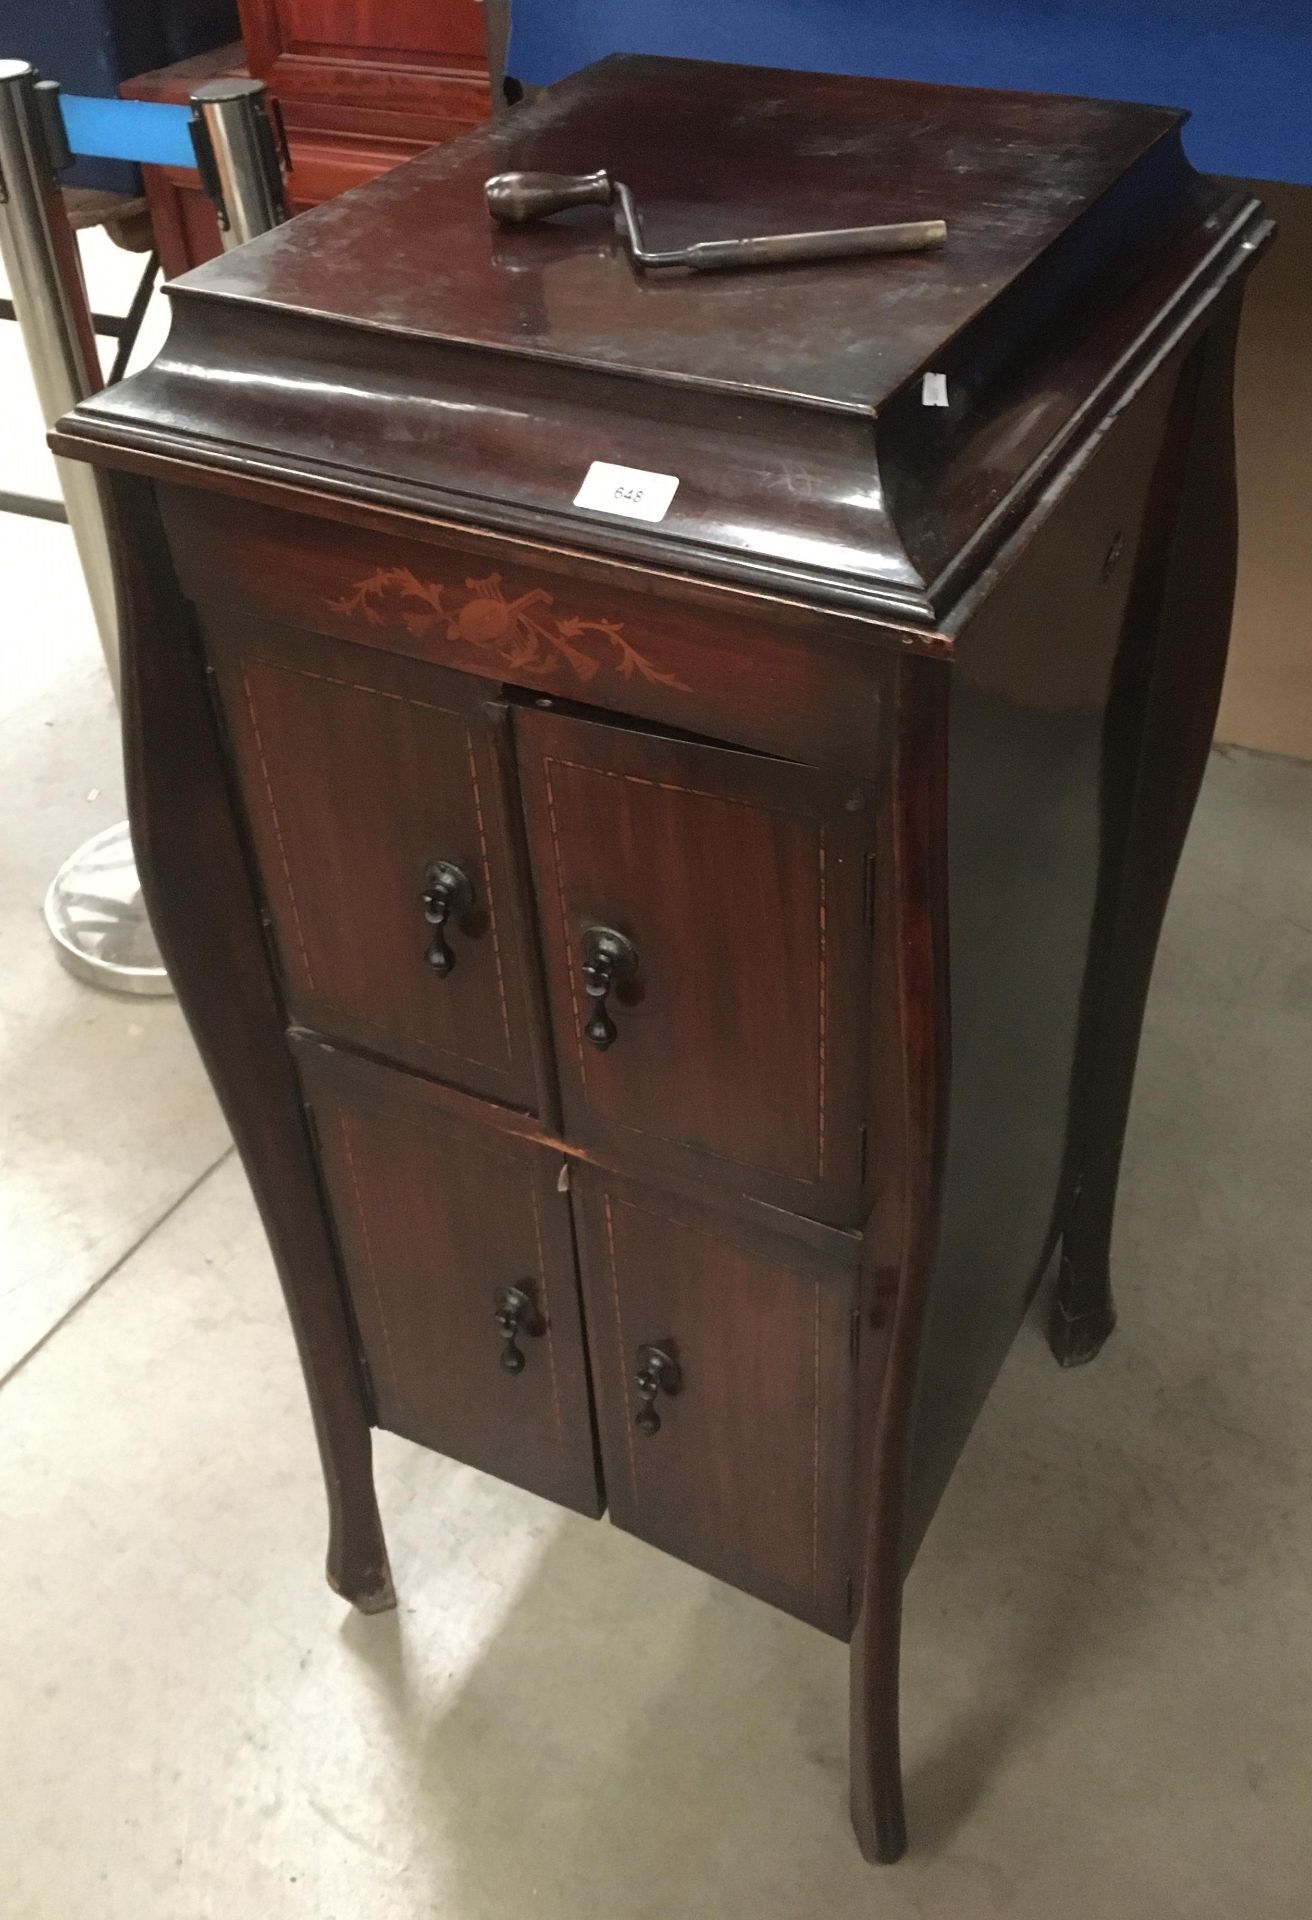 The Royal Imperial gramophone in a mahogany freestanding cabinet (as seen,